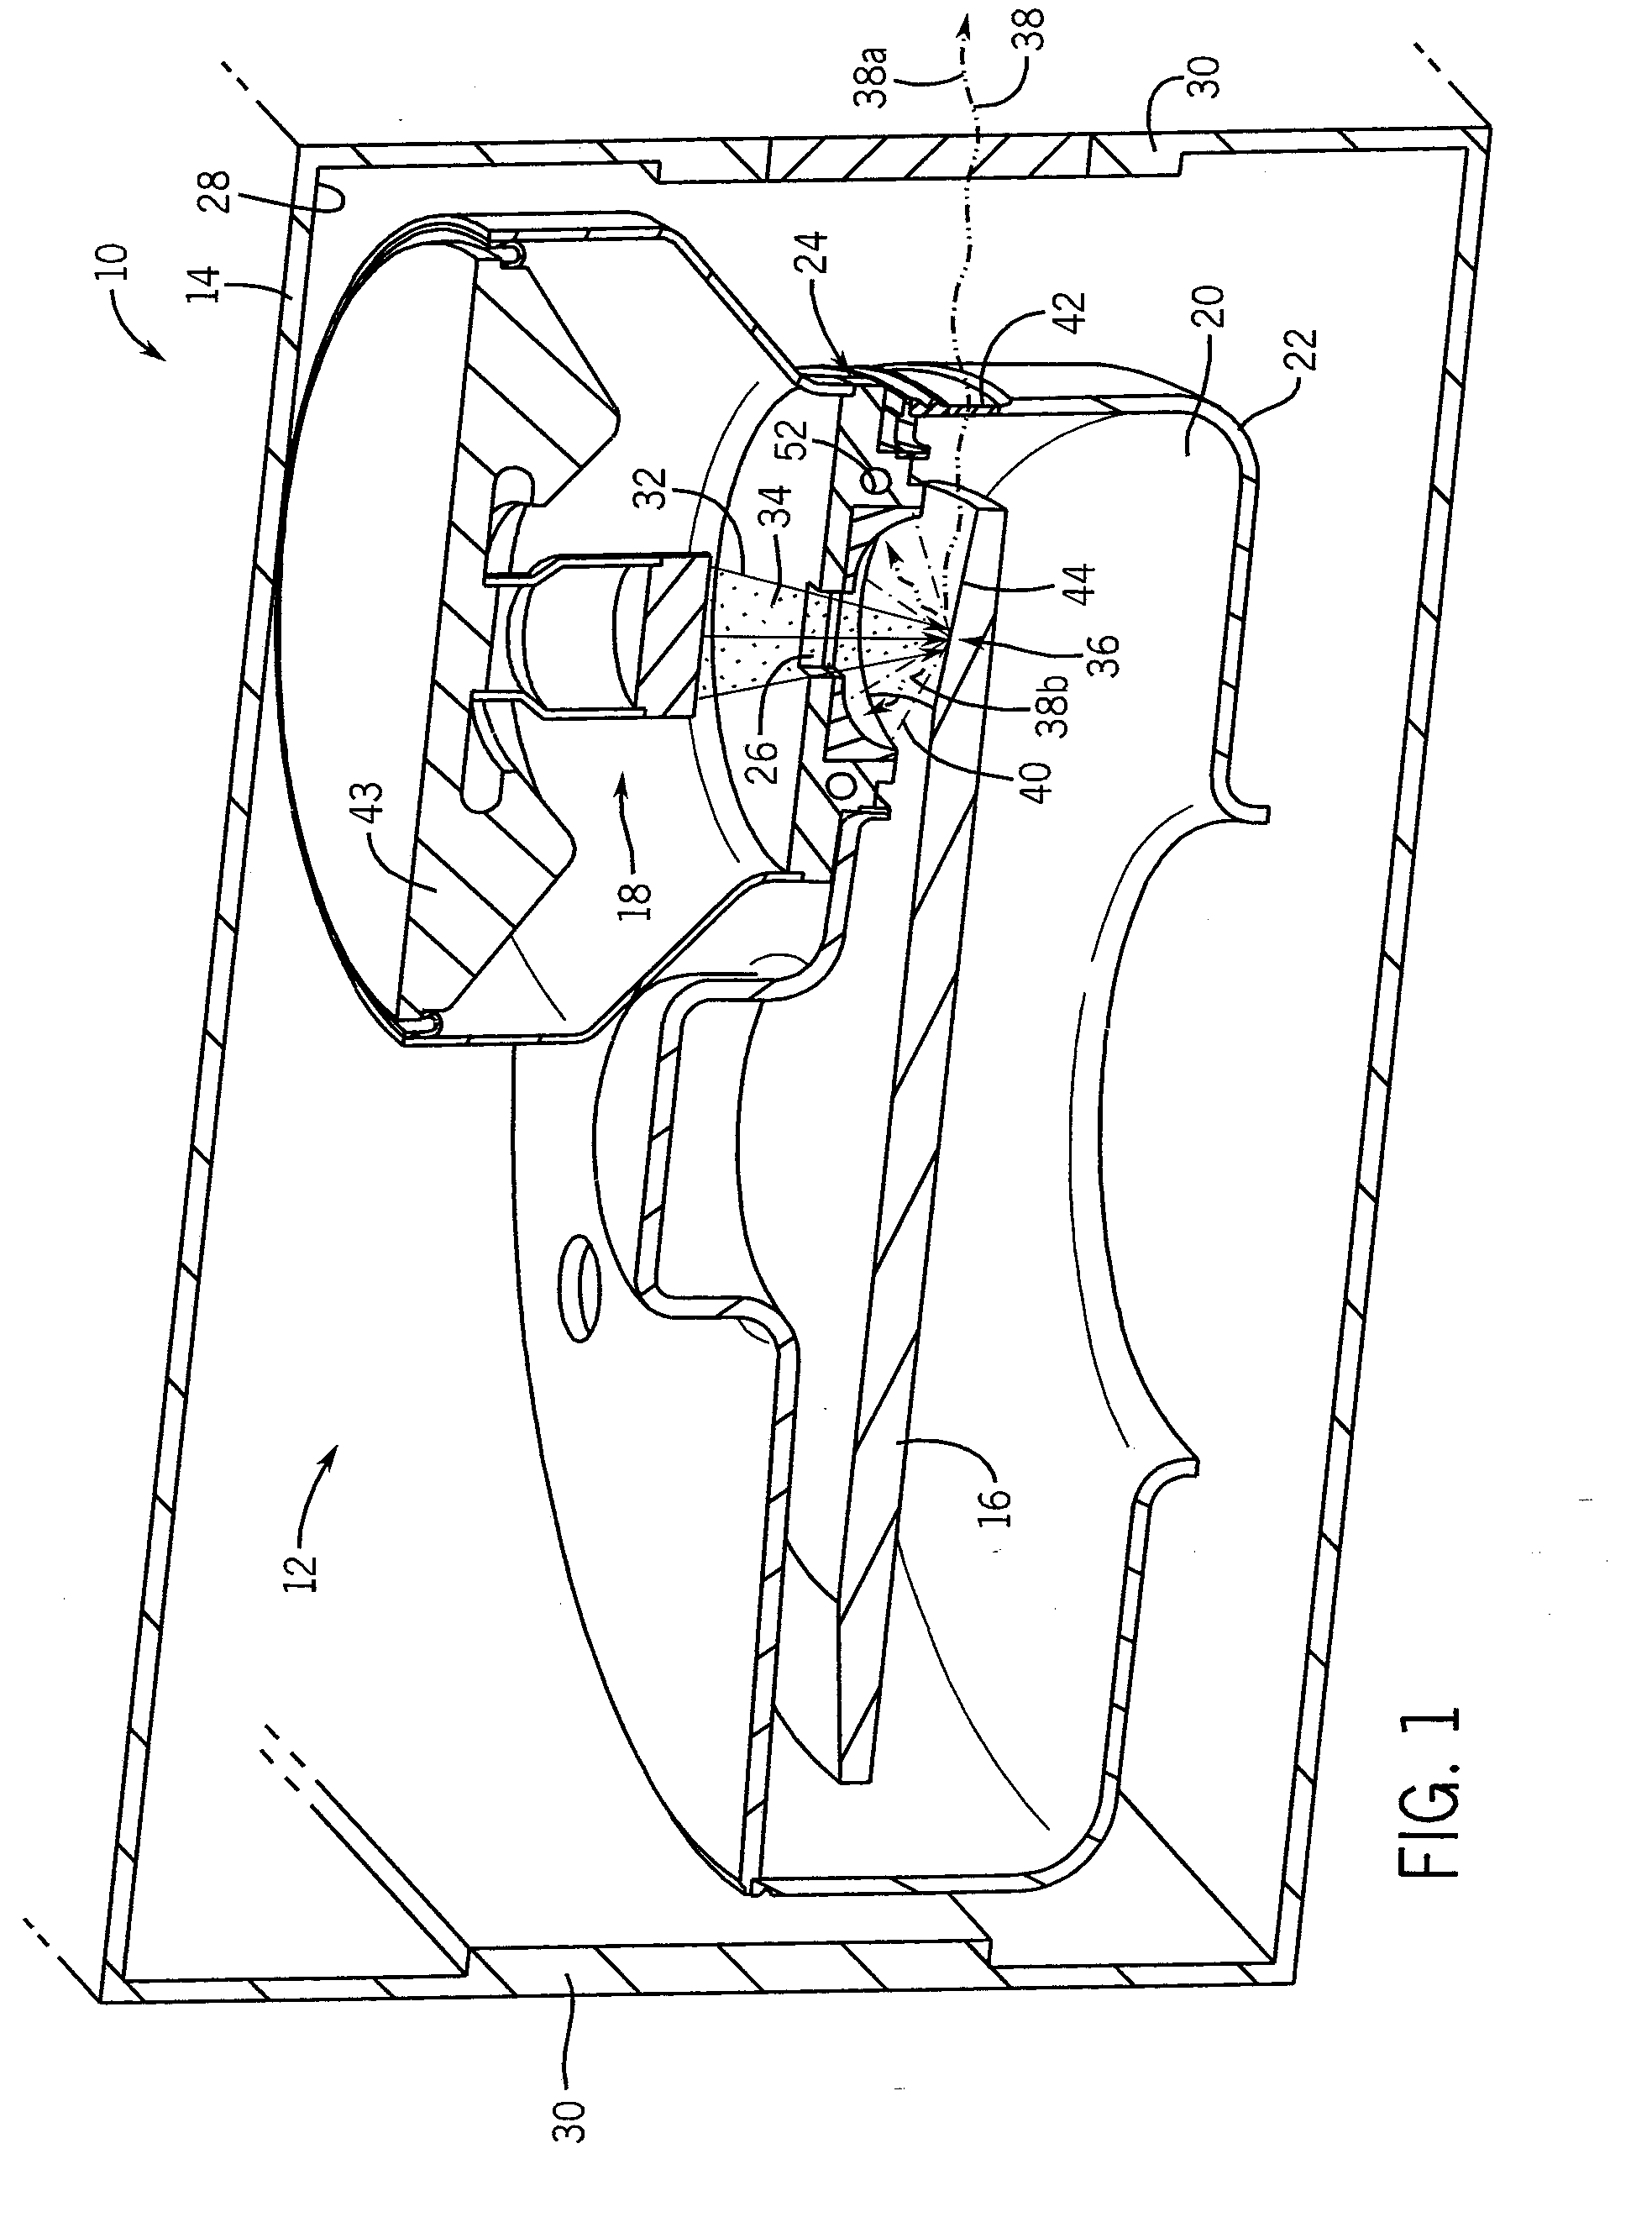 Shield assembly apparatus for an x-ray device